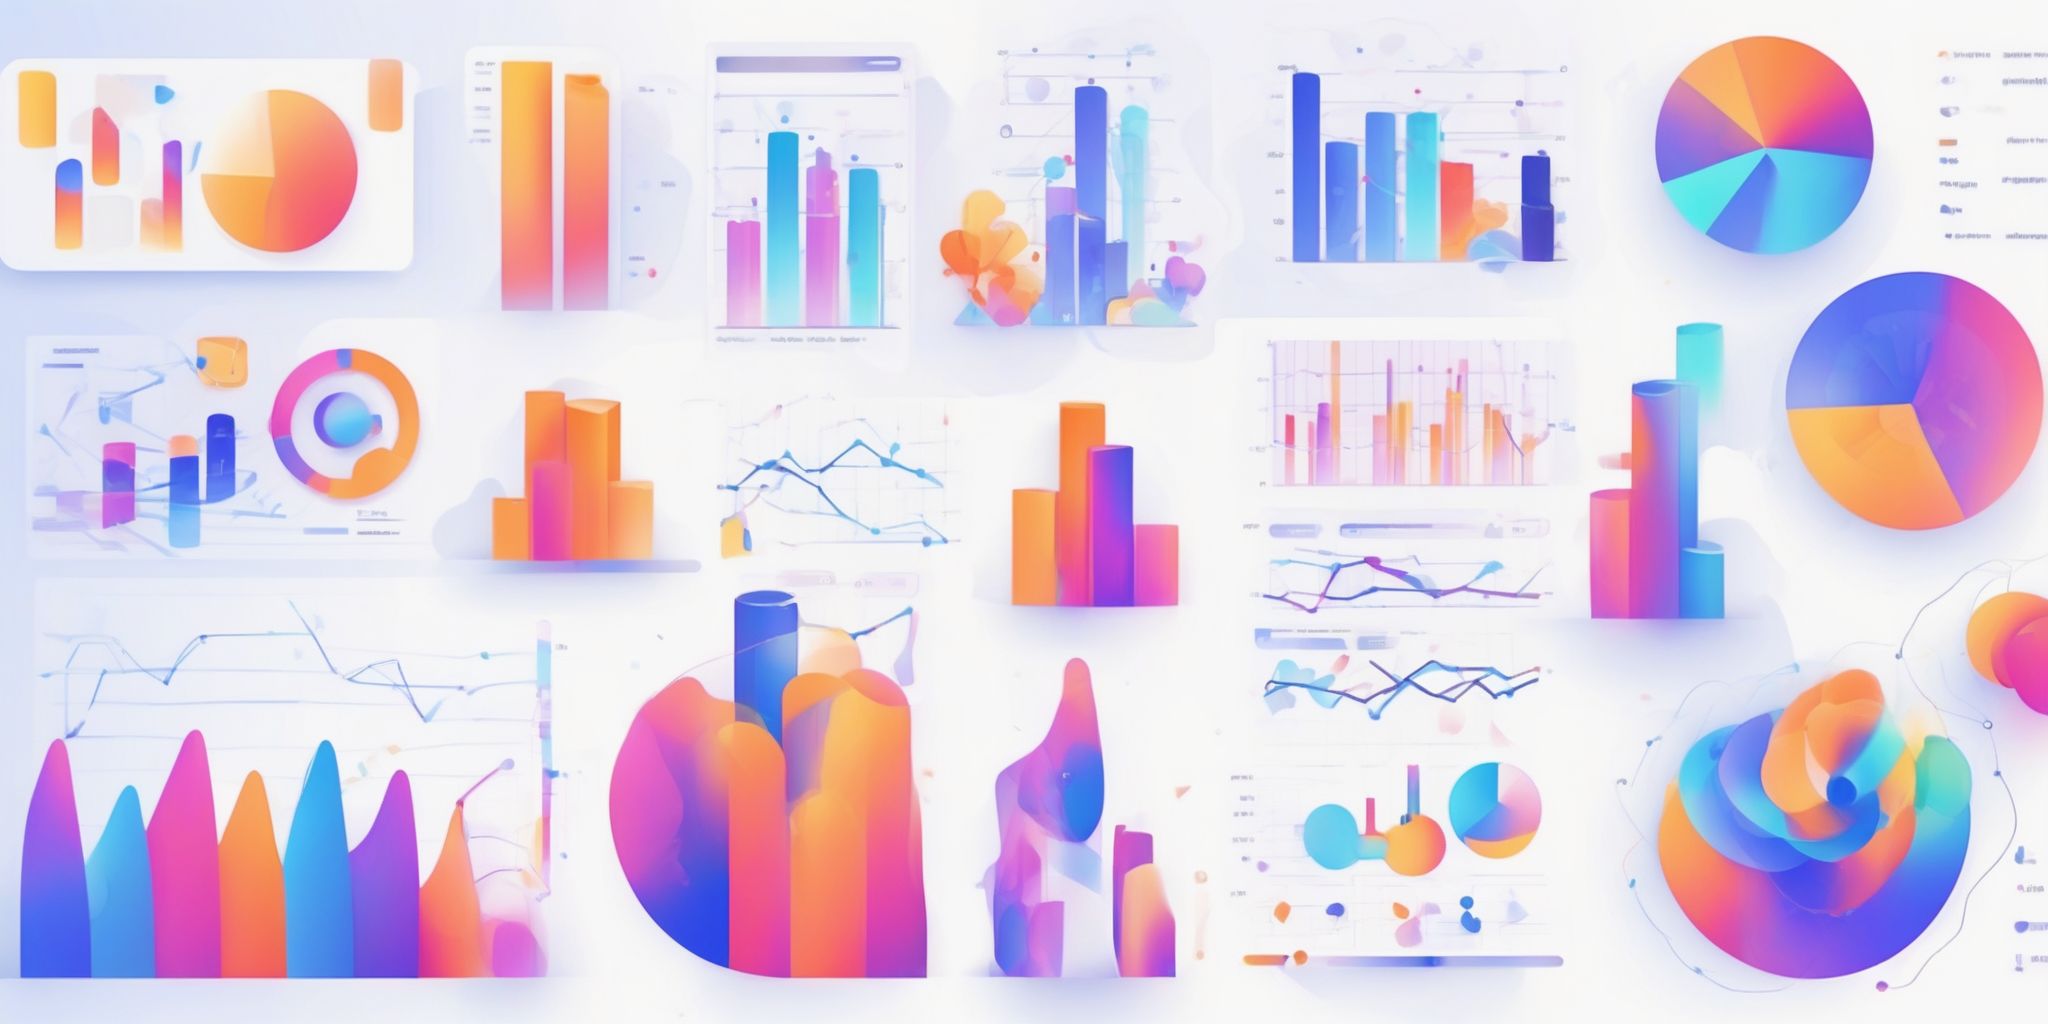 data analytics in illustration style with gradients and white background